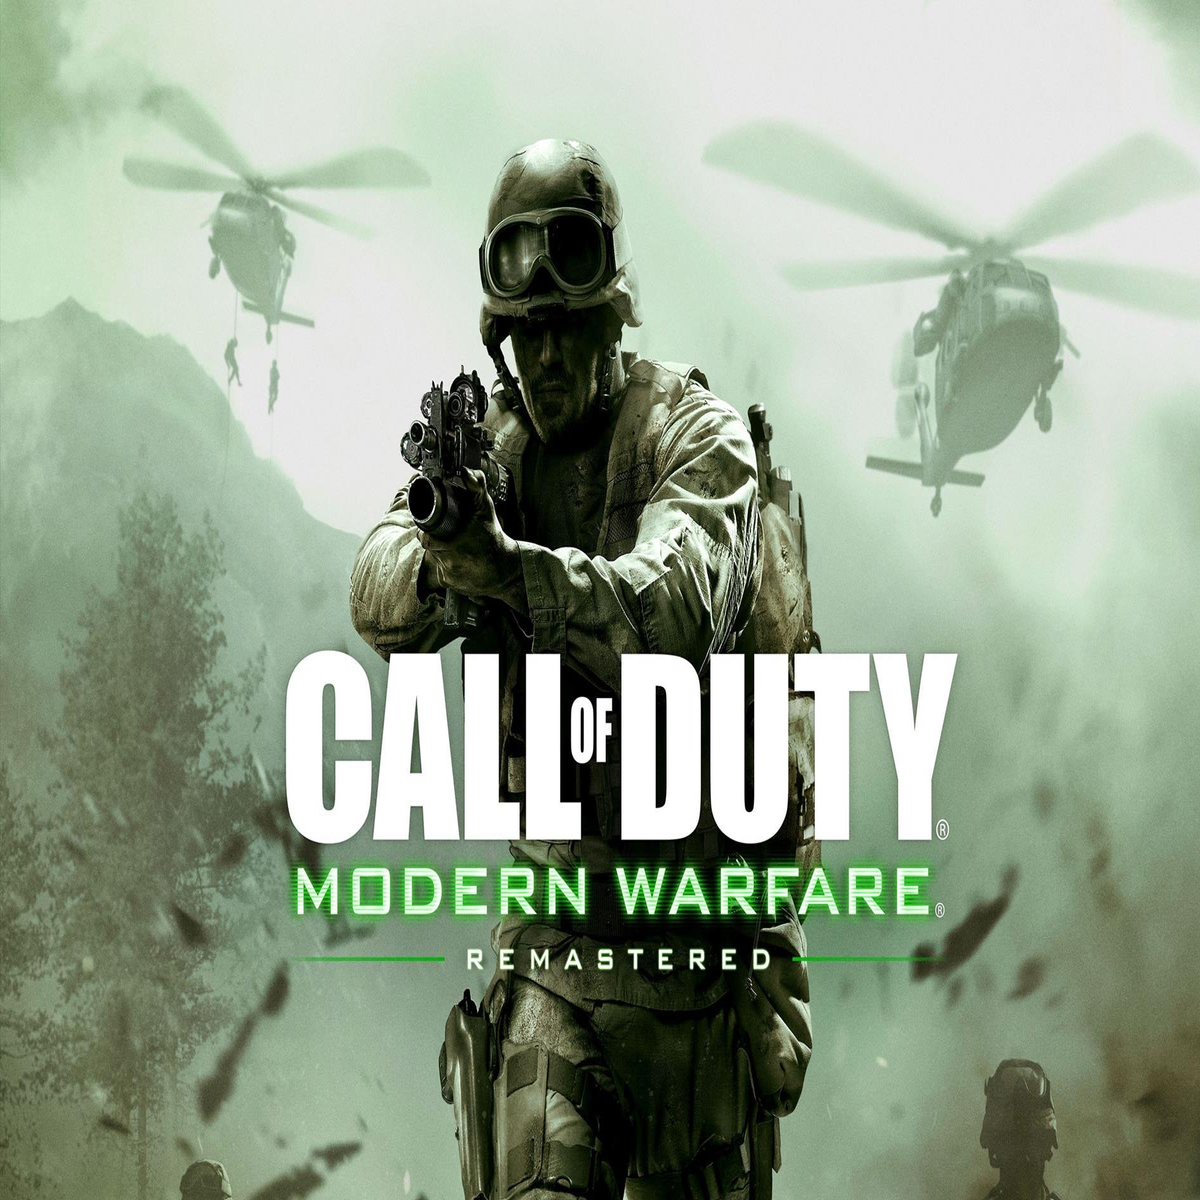 Call of Duty: Modern Warfare Remastered Gamefly listing suggests standalone  release next month | VG247